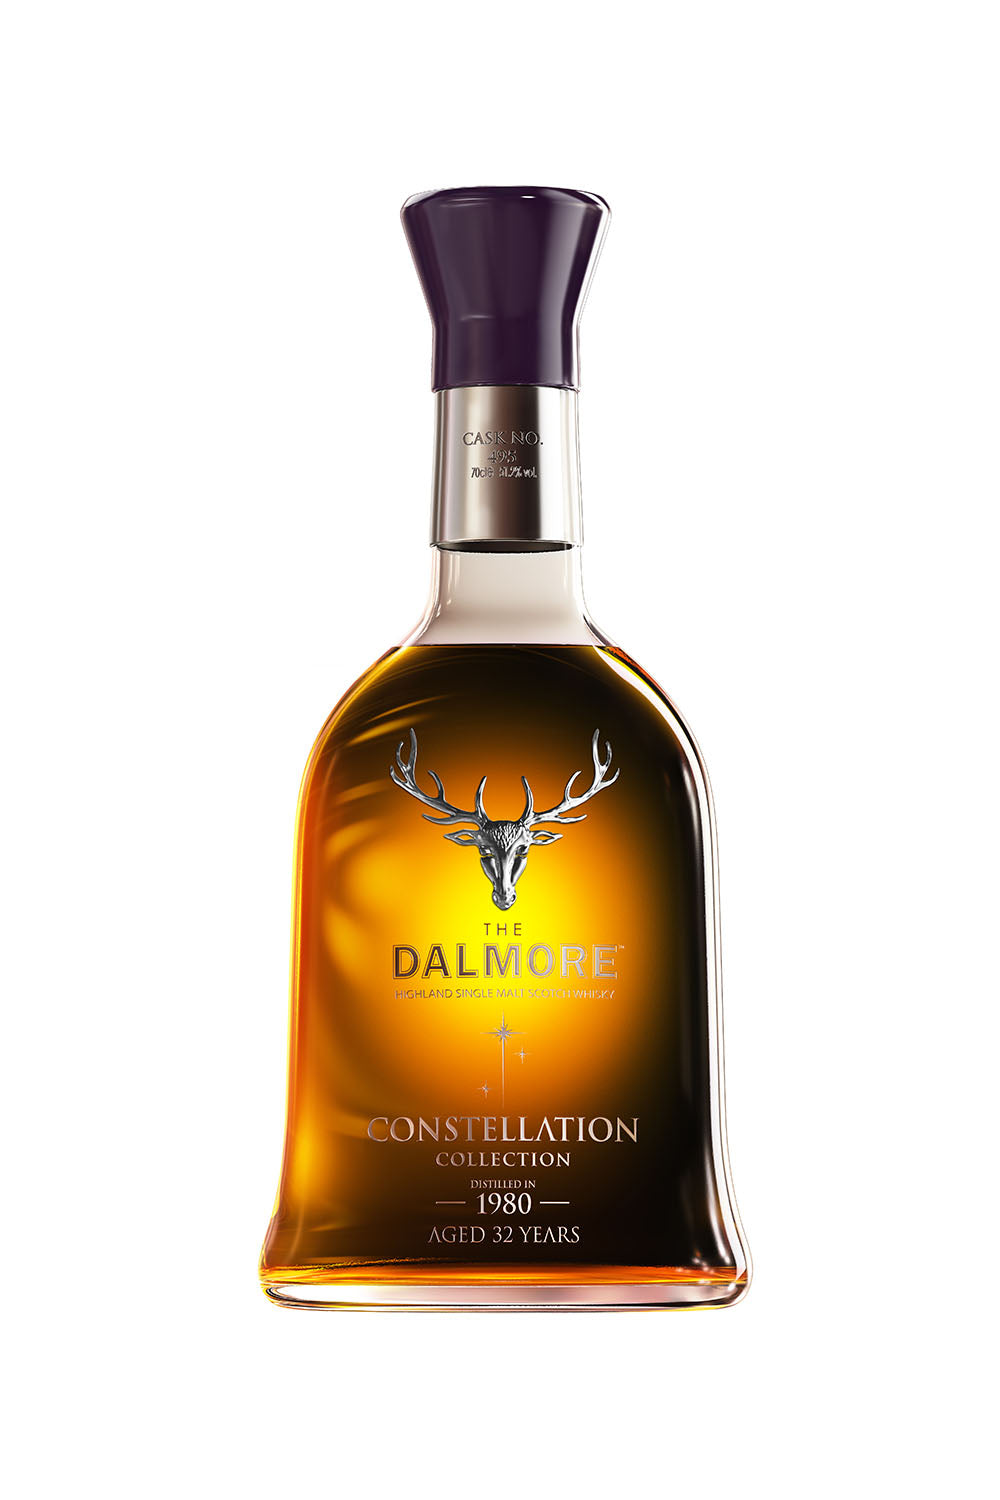 The Dalmore 1980 Constellation - Cask 495